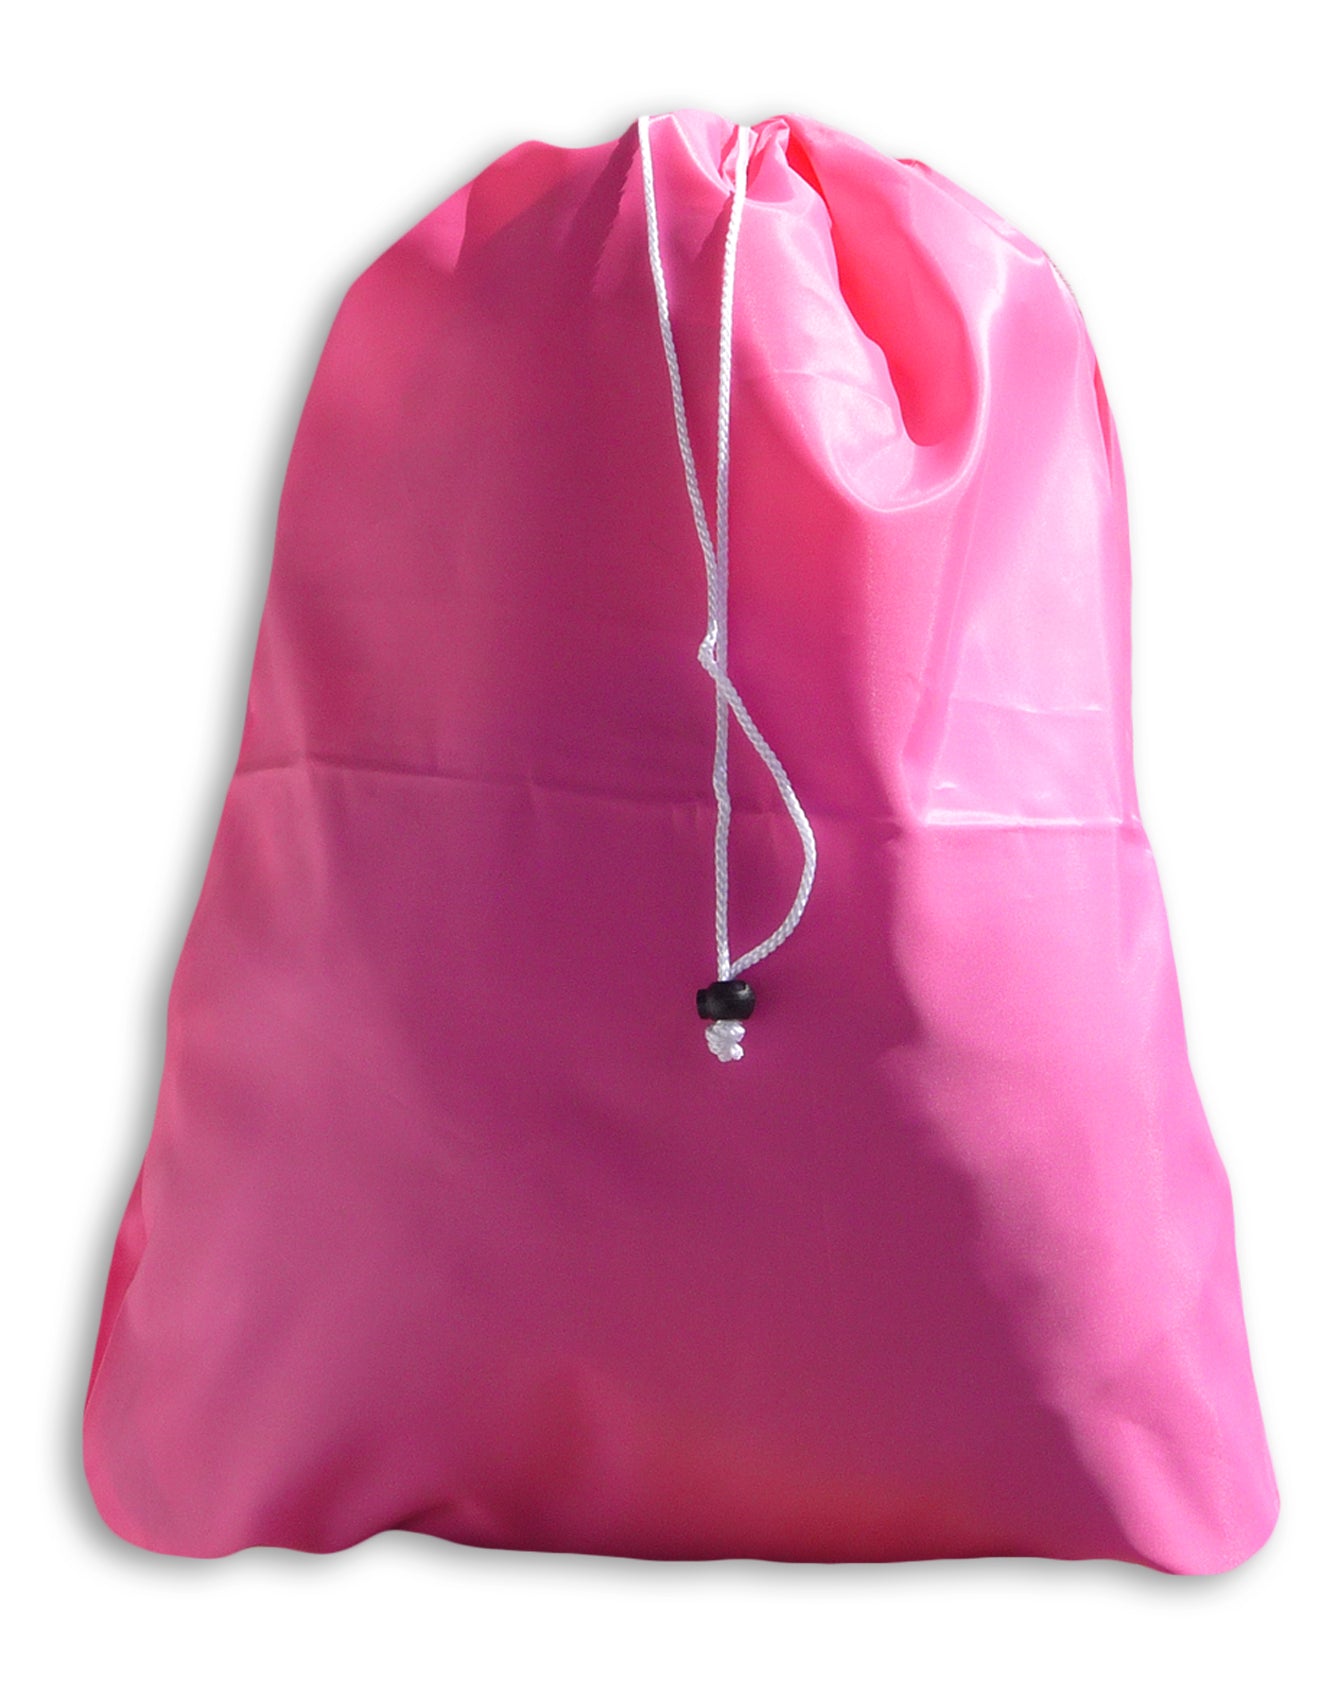 Laundry and Storage Bag - 331 Pale rose –